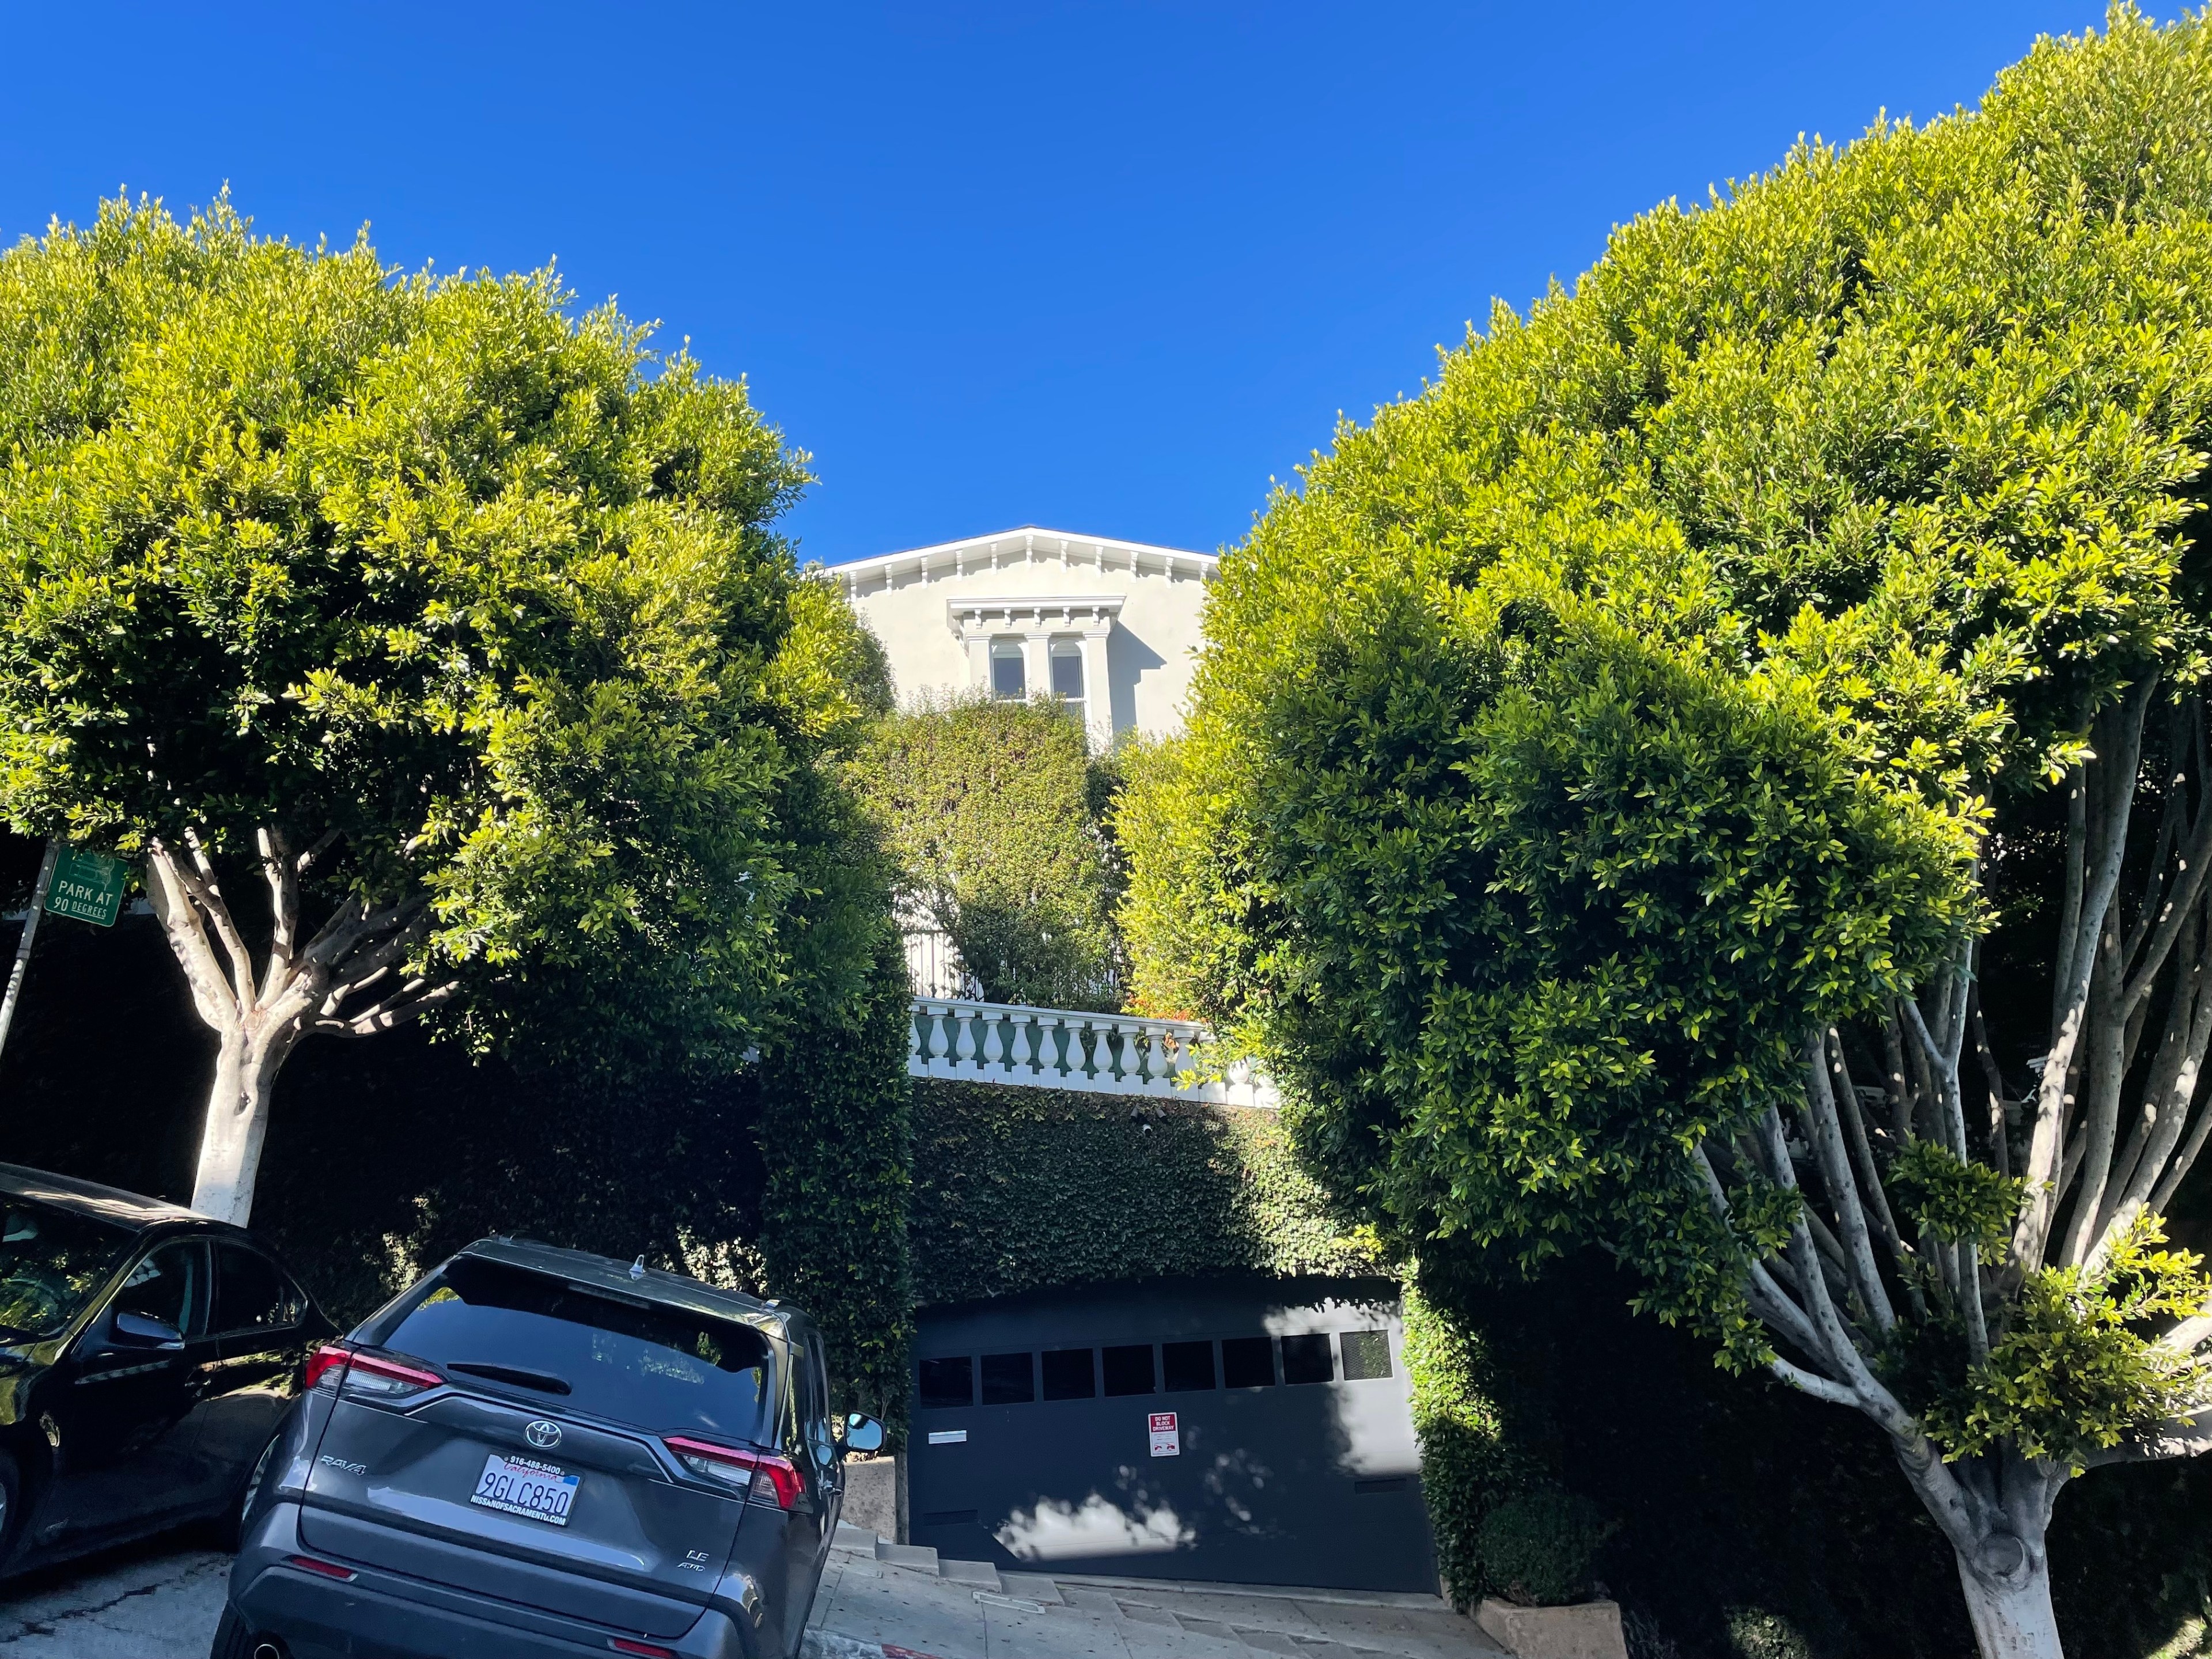 A San Francisco mansion is seen between rows of trees.